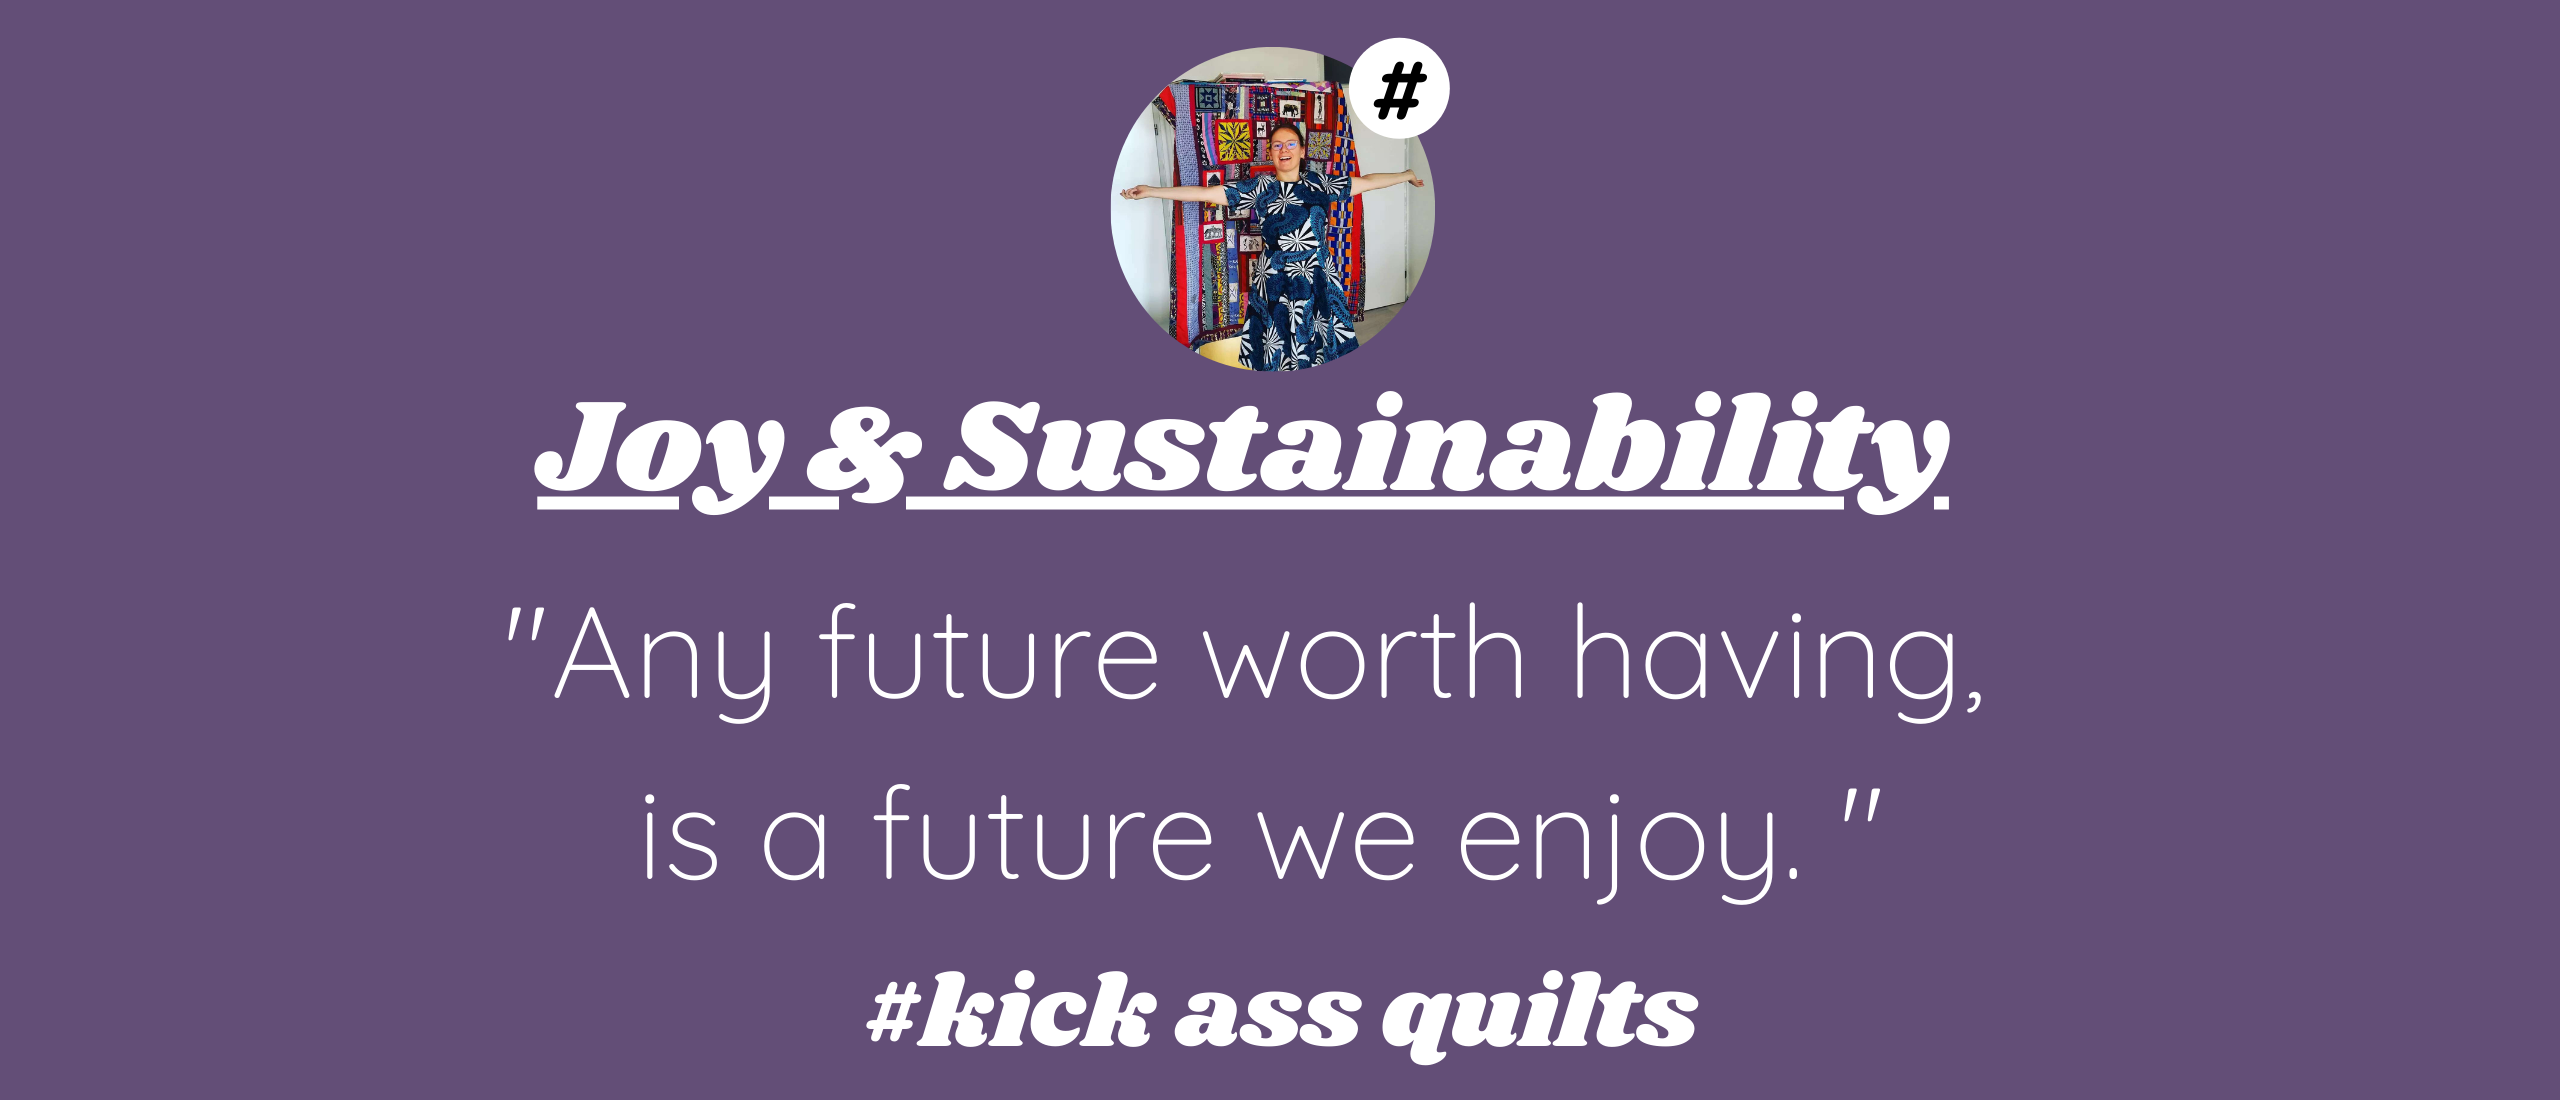 A Future Worth Fighting for: Joy, Sustainability & Quilting - Weekly Inspiration #10